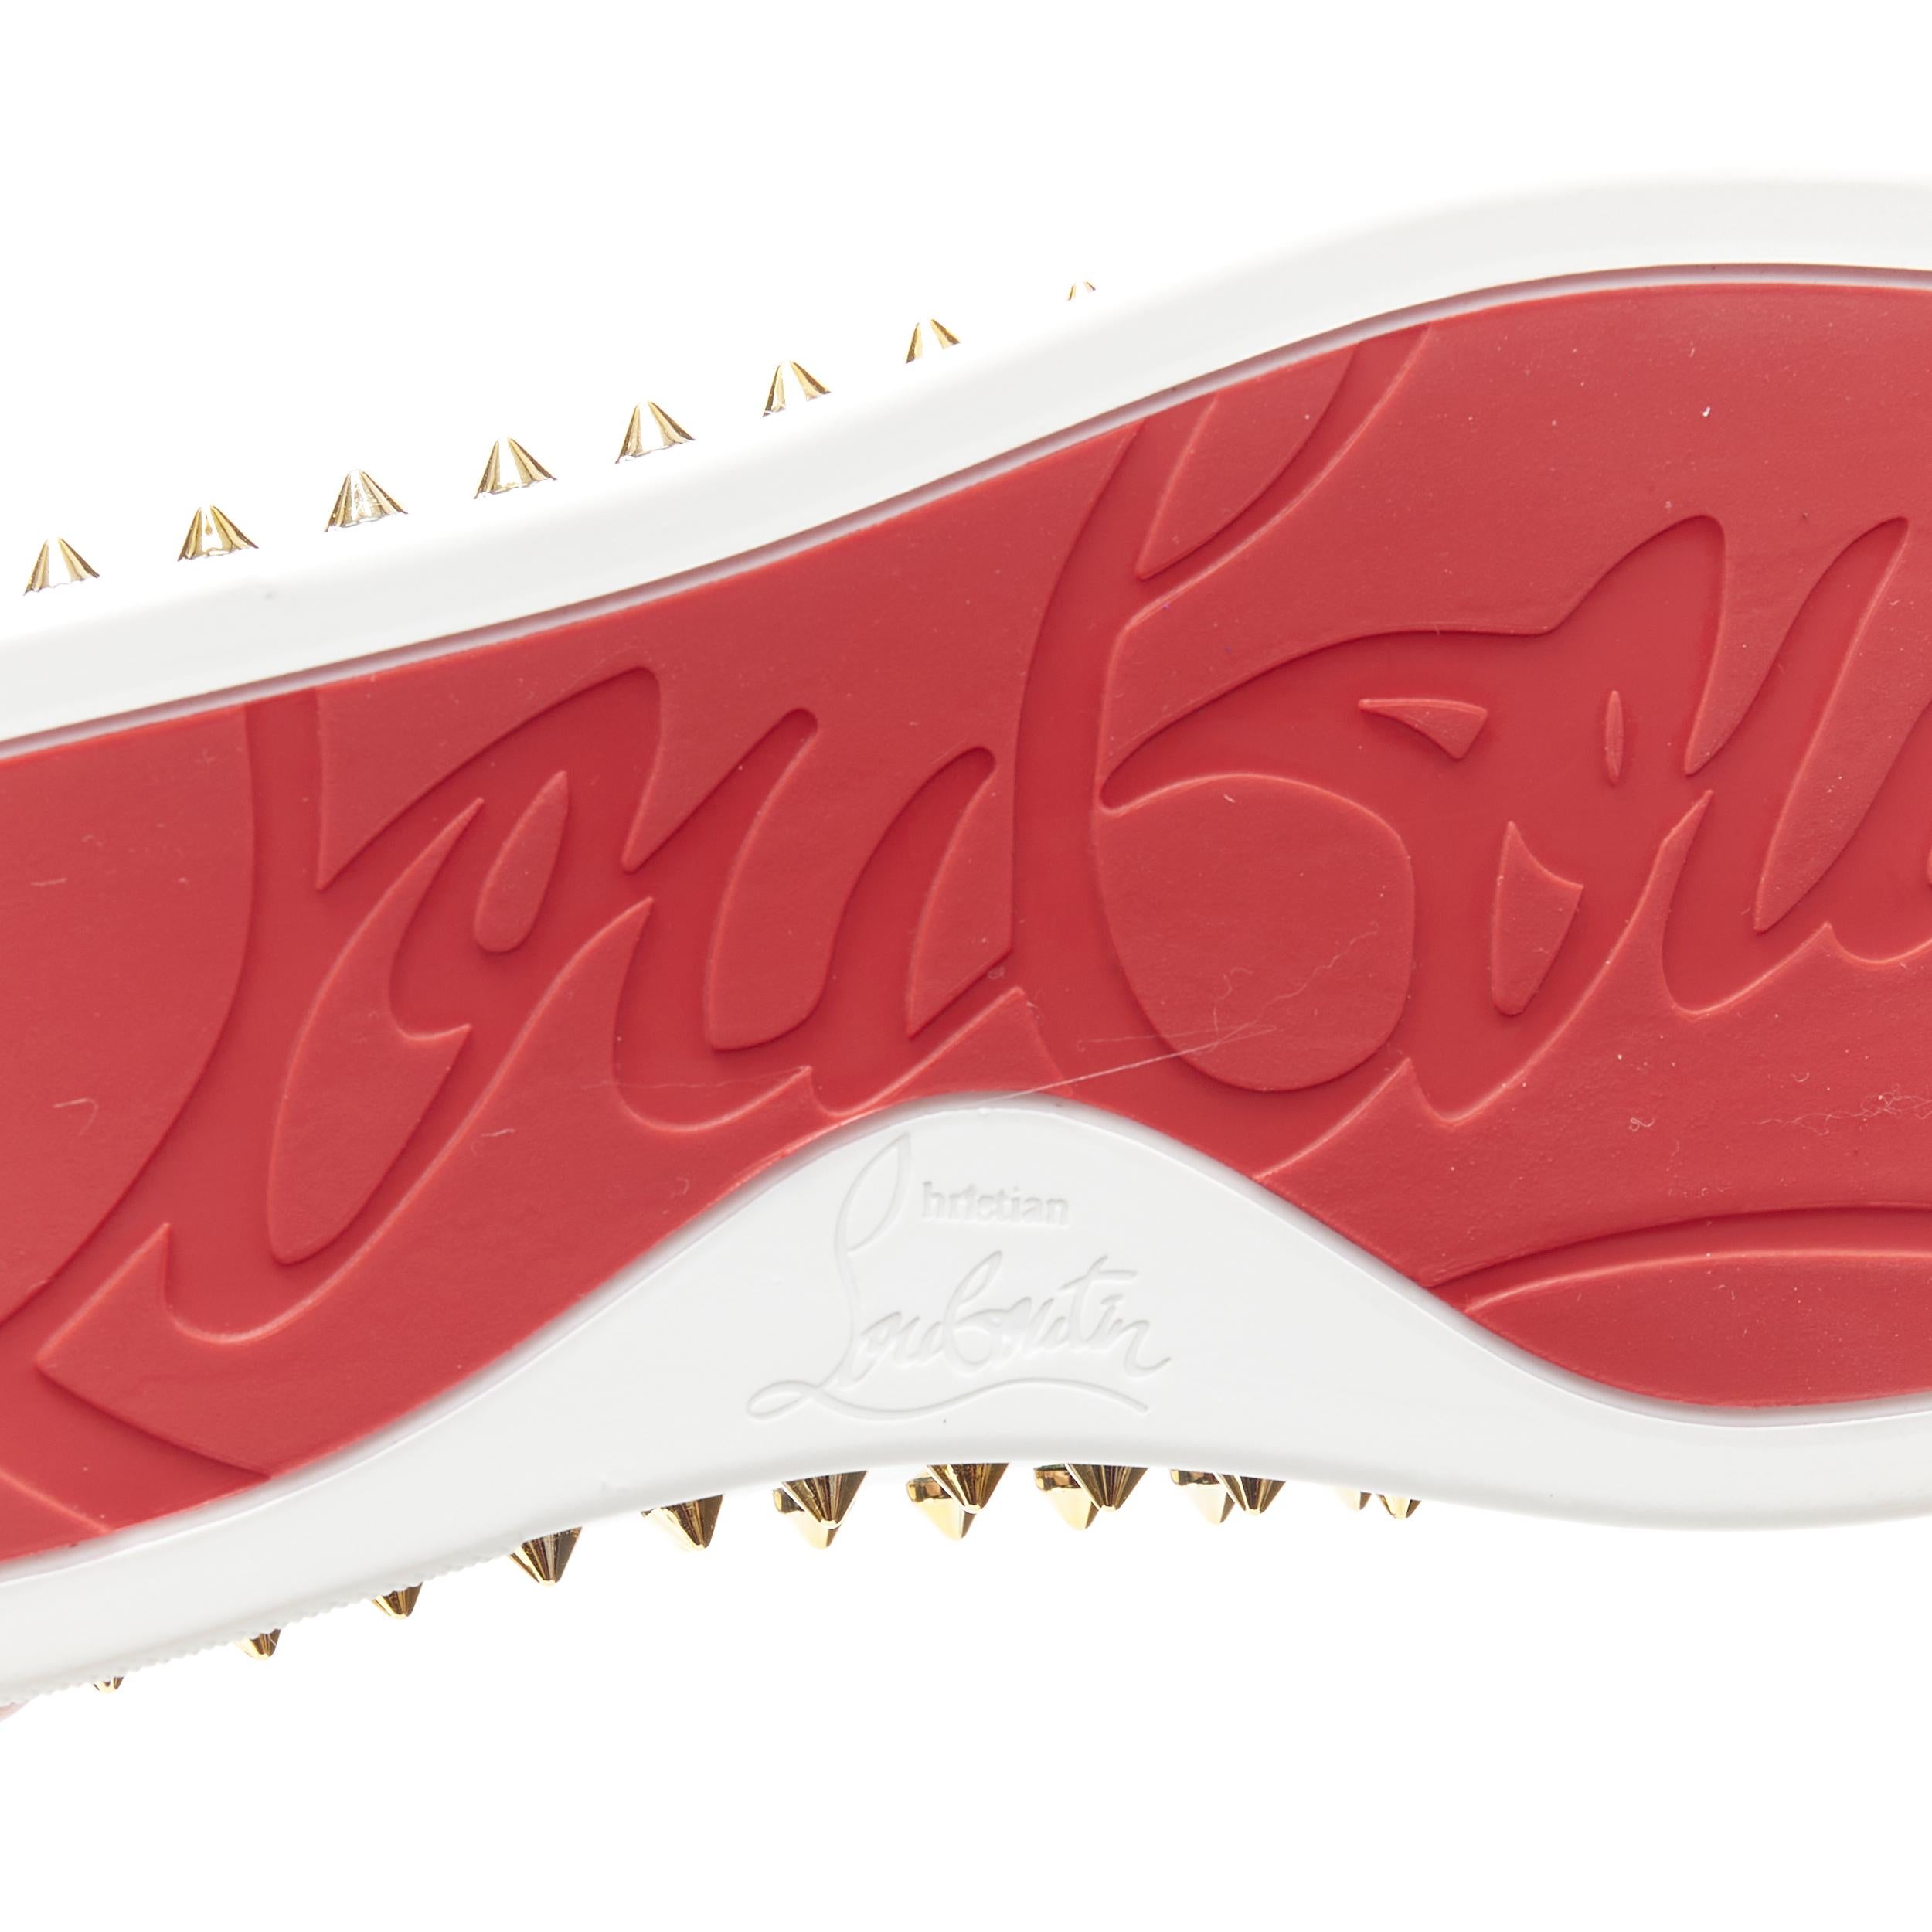 CHRISTIAN LOUBOUTIN Pik Boat abstract patent gold spike stud low sneaker EU37 3